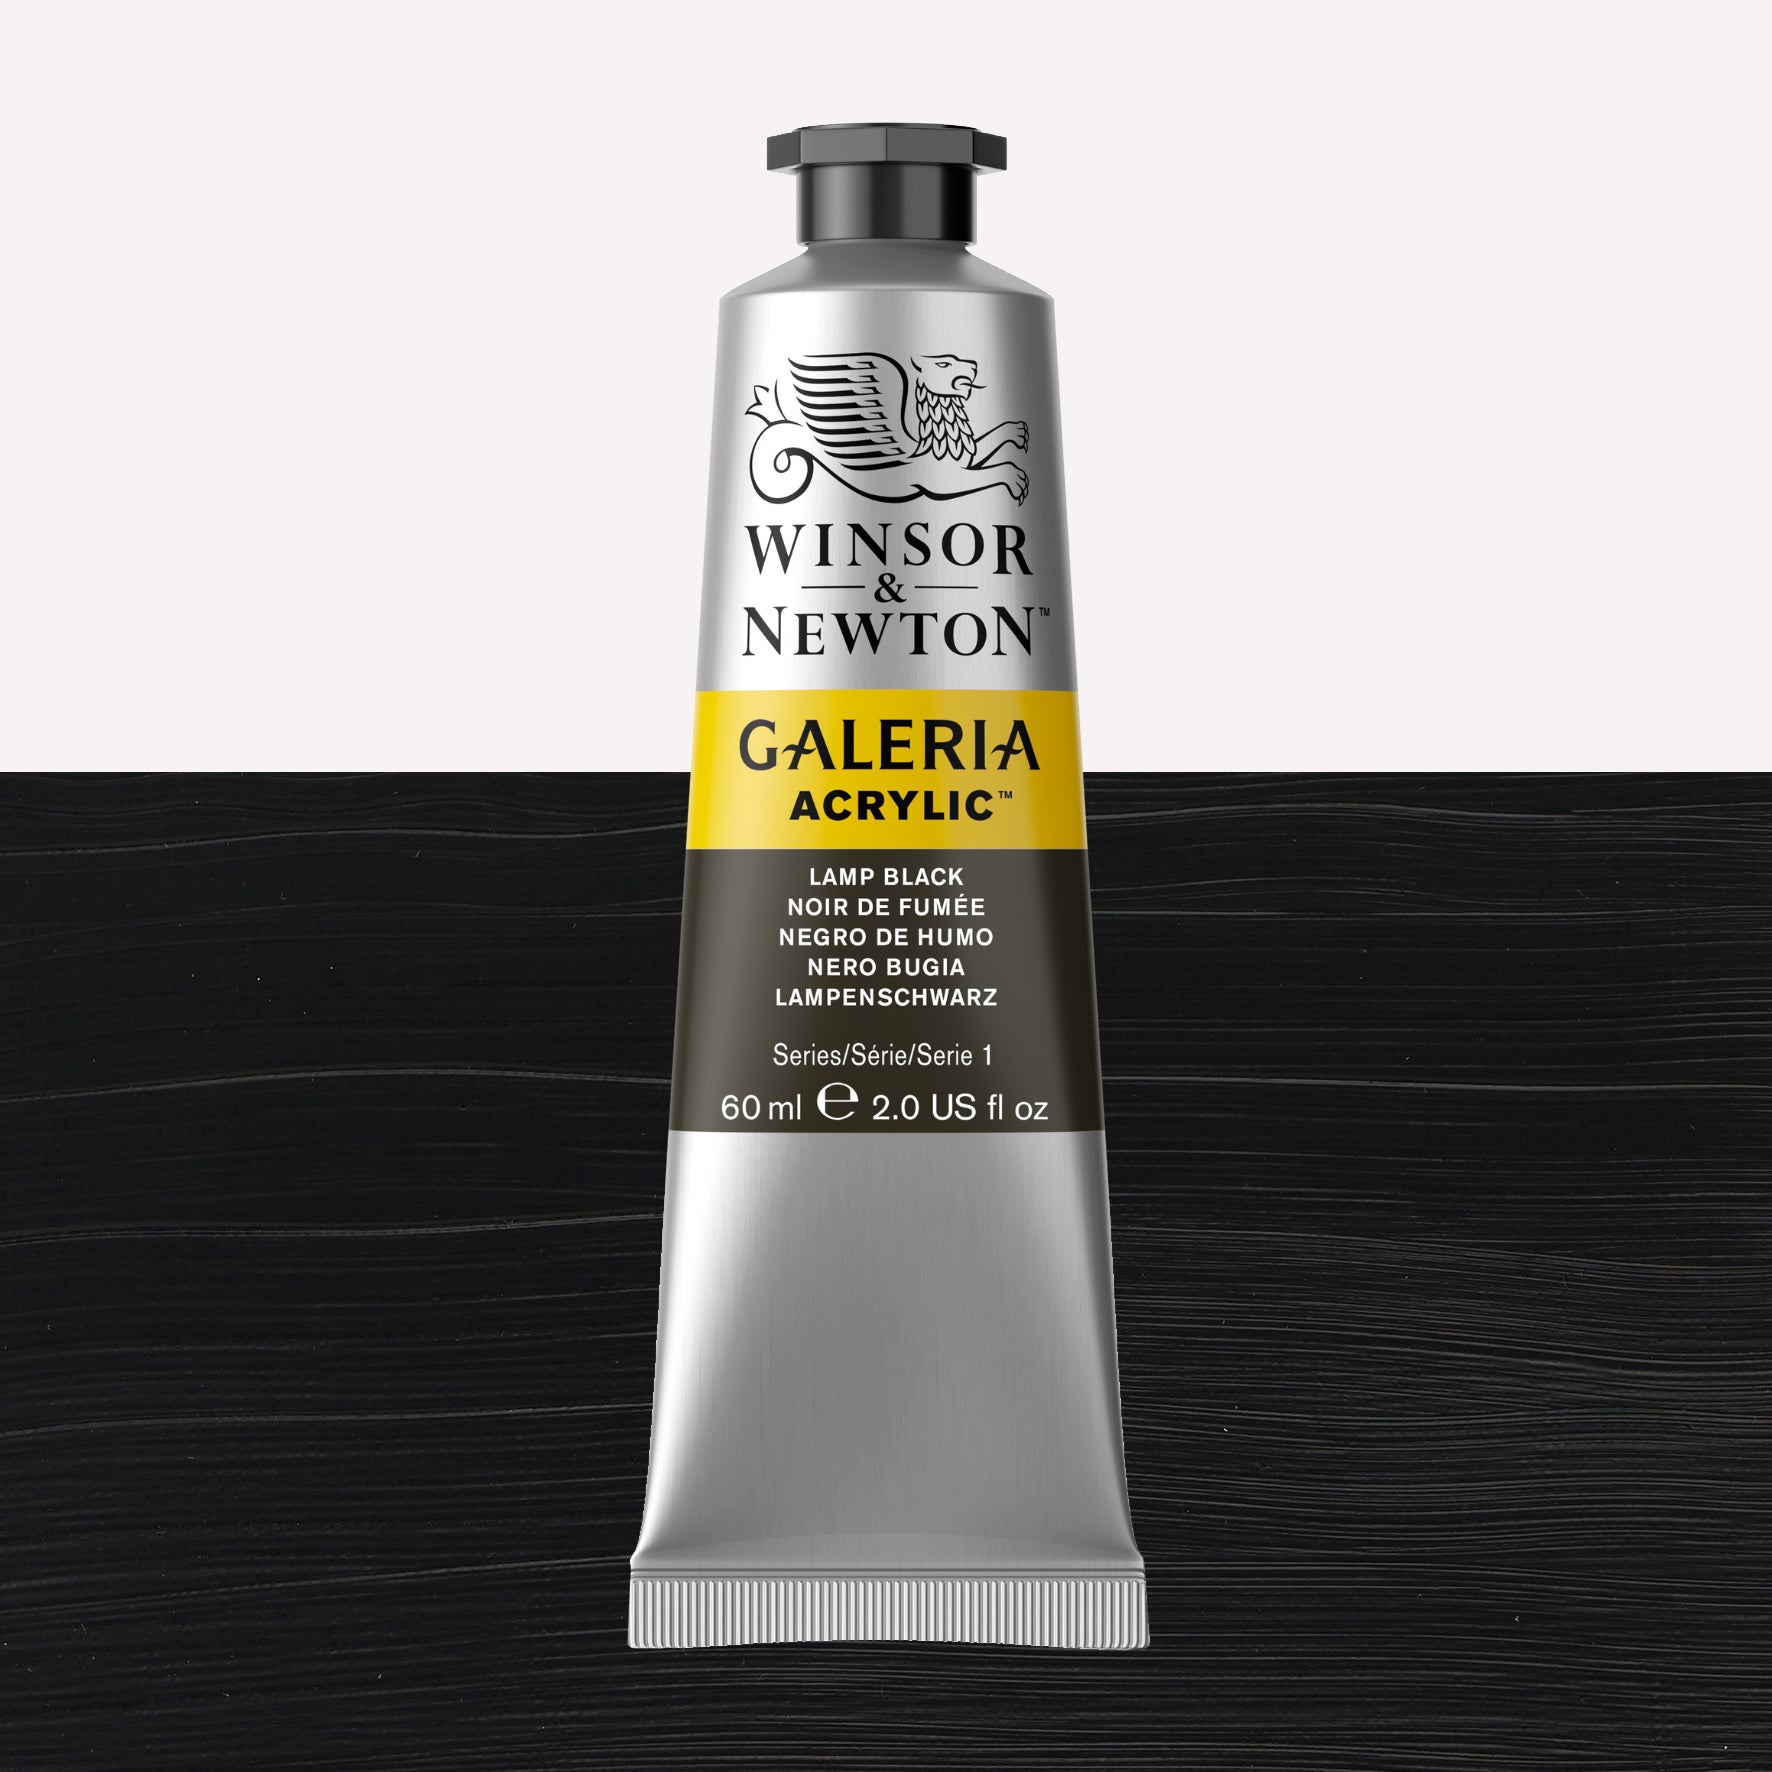 A 60ml tube of vibrant Galeria Acrylic paint in the shade Lamp Black. This professional-quality paint is packaged in a silver tube with a black lid. Made by Winsor and Newton.